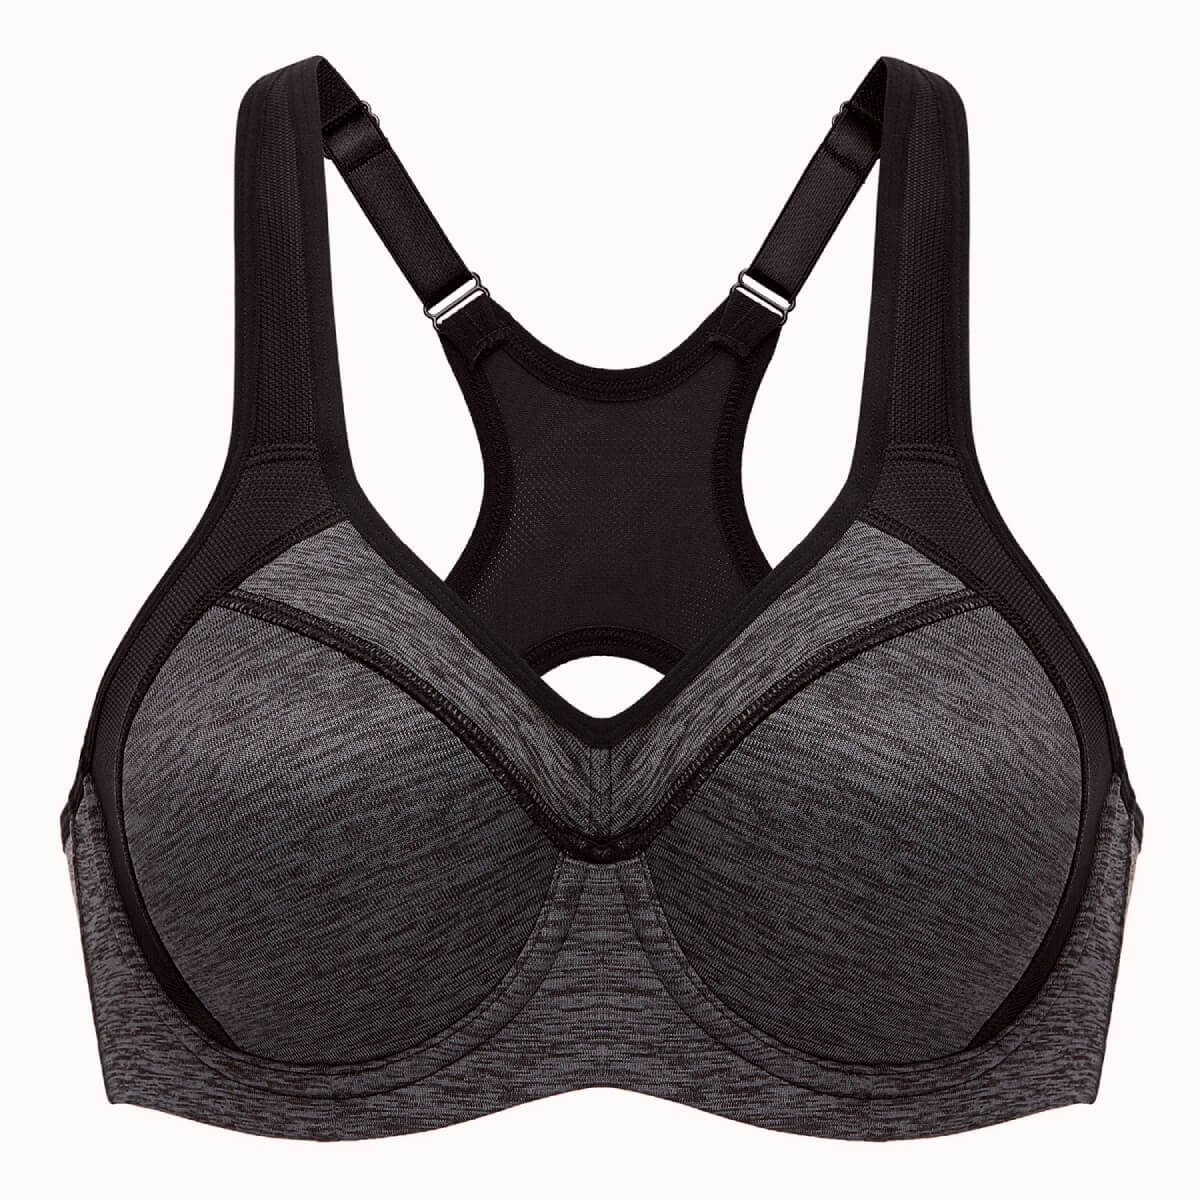 Moving Comfort Sport Bra 38B 36B 36C Large Wire Free Running High Support